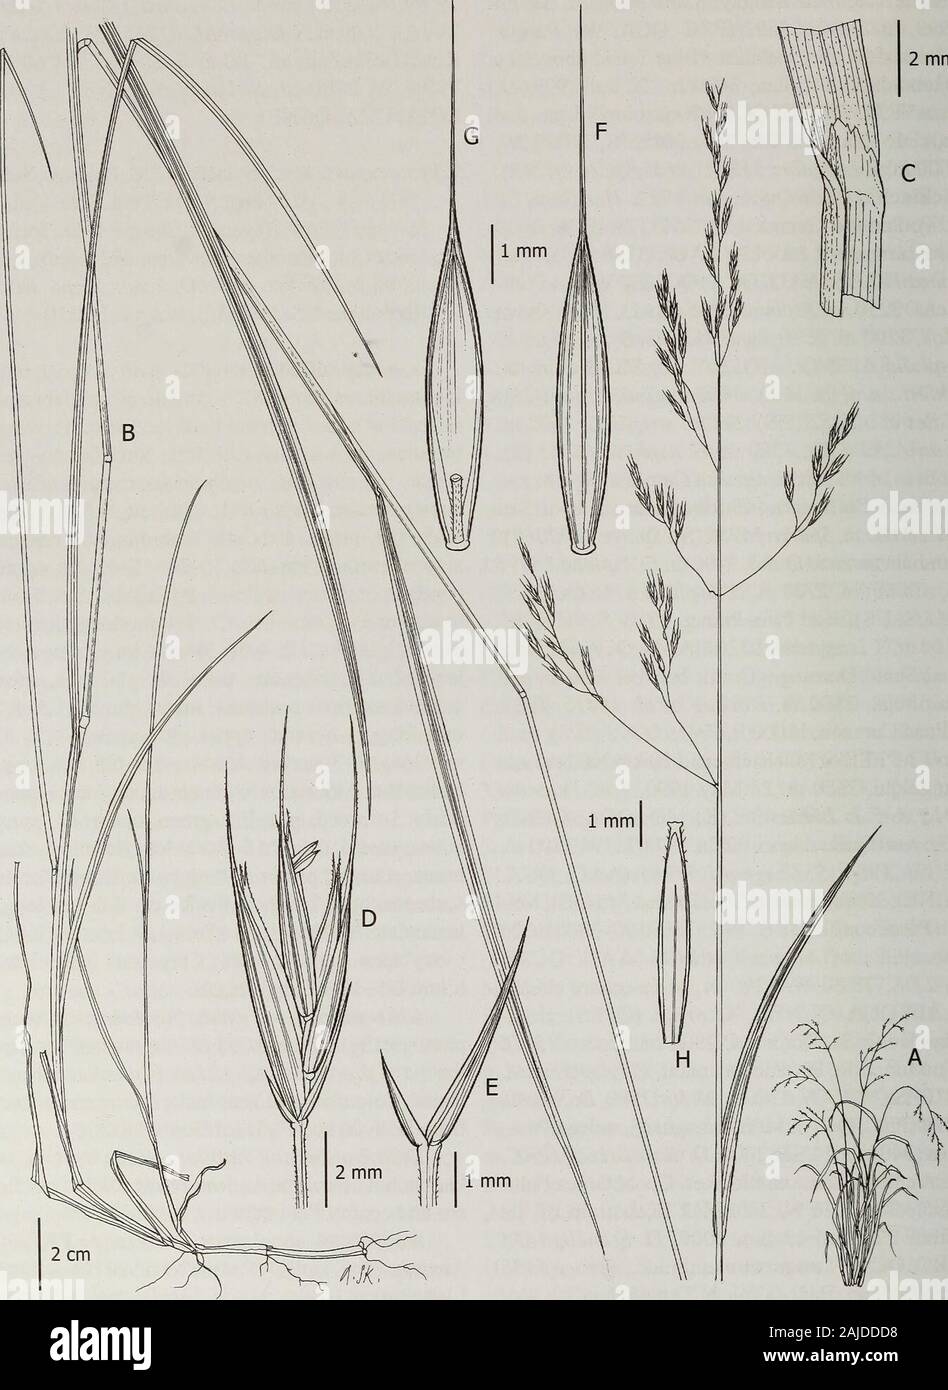 Contributions from the United States National Herbarium . long, terminal, sca-brous, straight; paleas as long as the lemma, keelsscabrous, apex hairy; lodicules ca. 0.8 mm long,lanceolate, acuminate; anthers 1.5-1.6 mm long;ovary apex sparsely hairy. Caryopses lanceolate;hilum 2/5-1/2 of total length. Observations.— Festuca tovariensis is mor-phologically similar to other long-awned speciesthat have short glumes, such as: F. ulochaeta fromBrazil, Colombia, and Venezuela; F. cochabambanafrom Bolivia; and F.flacca from Ecuador. Distribution and habitat.—This species isknown only from the Andean Stock Photo